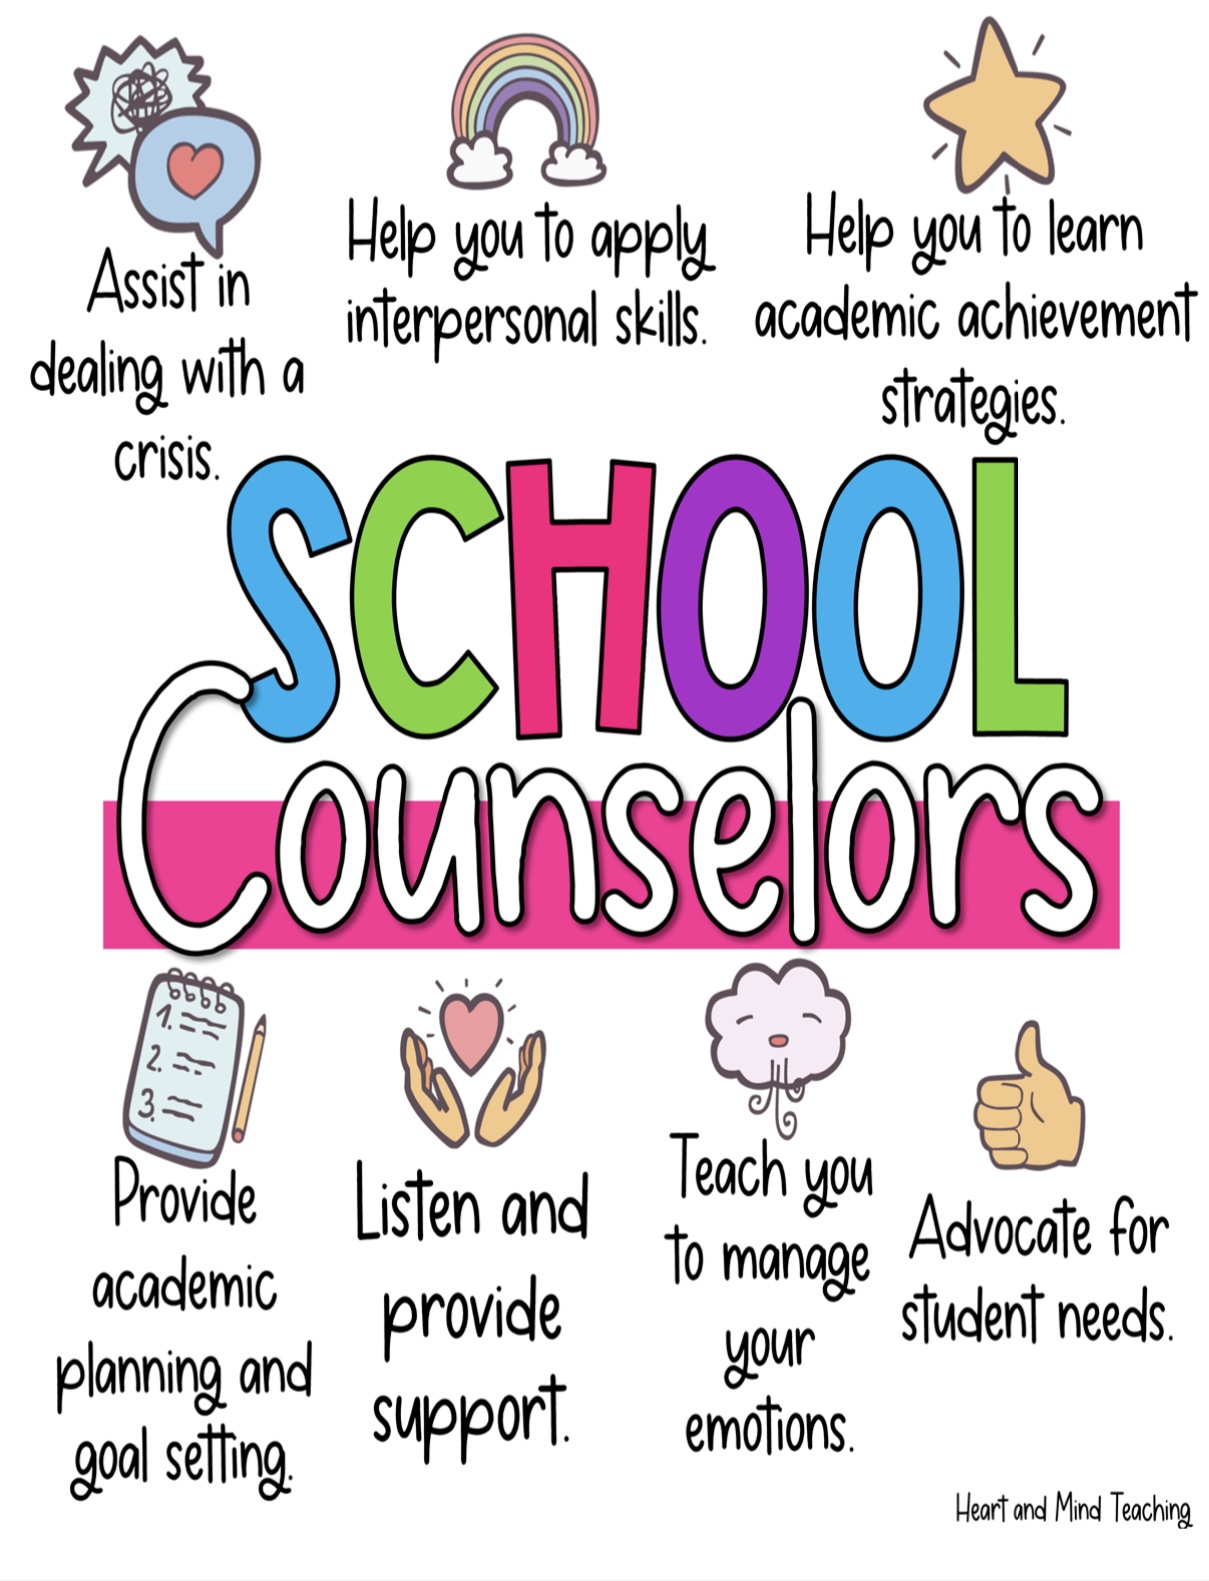 School Counselors assist in dealing with a crisis, help you to apply interpersonal skills, help you to learn academic achievement strategies,  provide academic planning and goal setting,  listen and provide support,  teach you to manage your emotions, and advocate for student needs. 